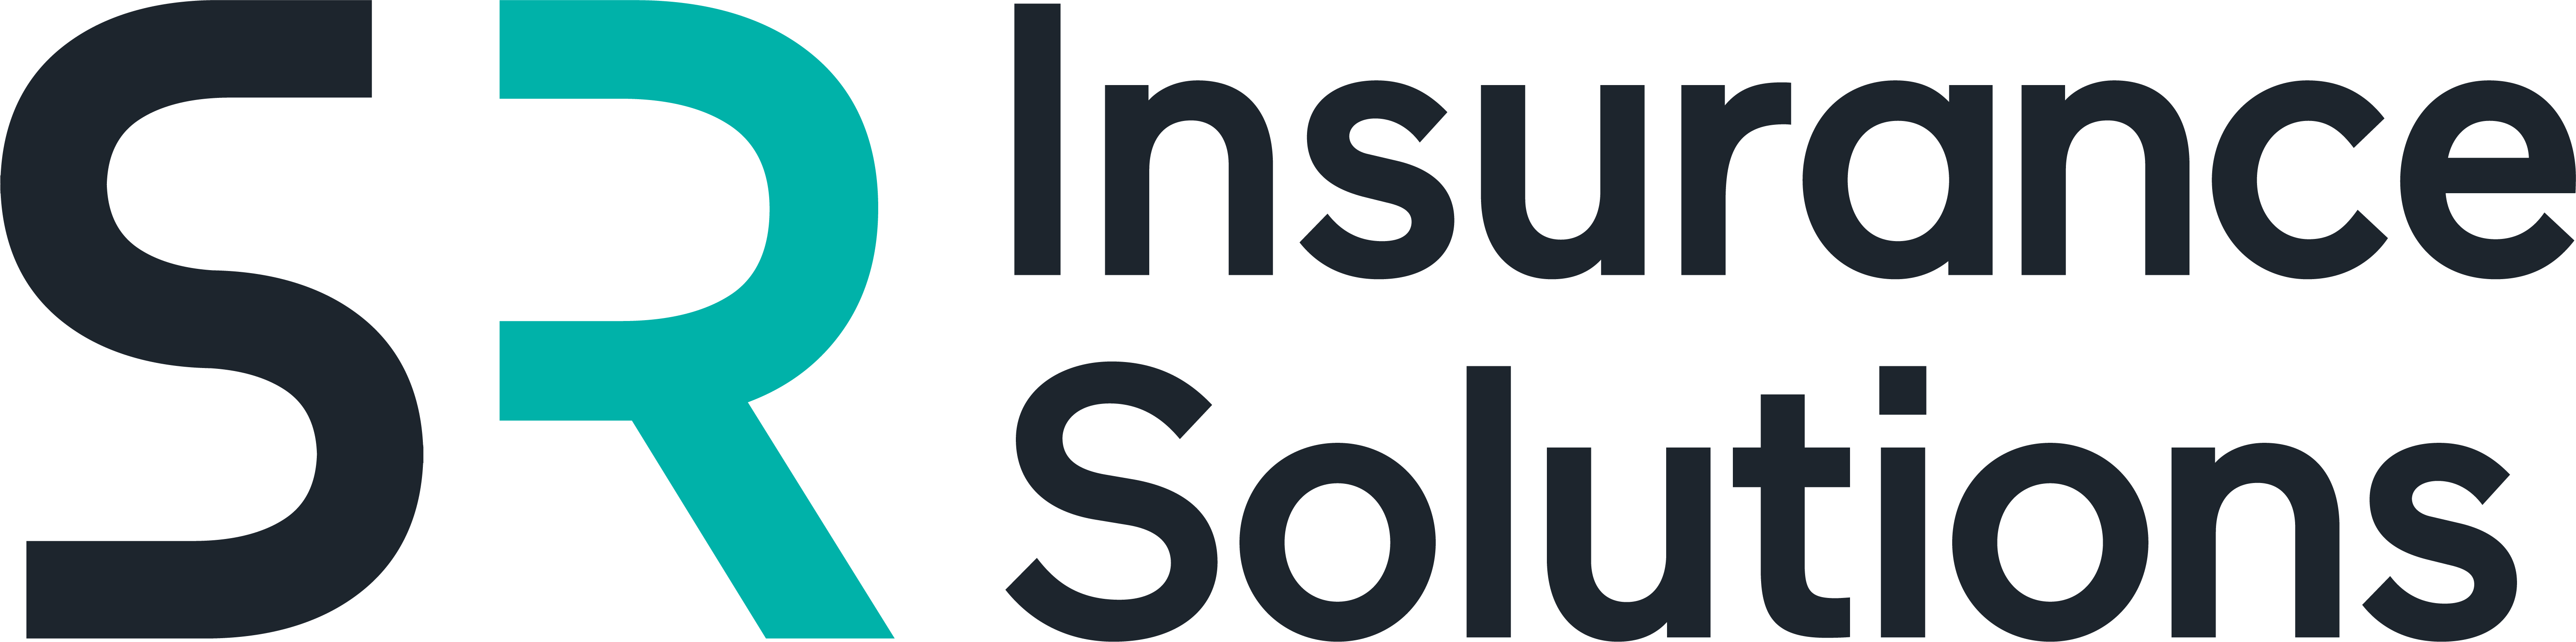 INSURANCE_SOLUTIONS_RGB(ON WHITE)